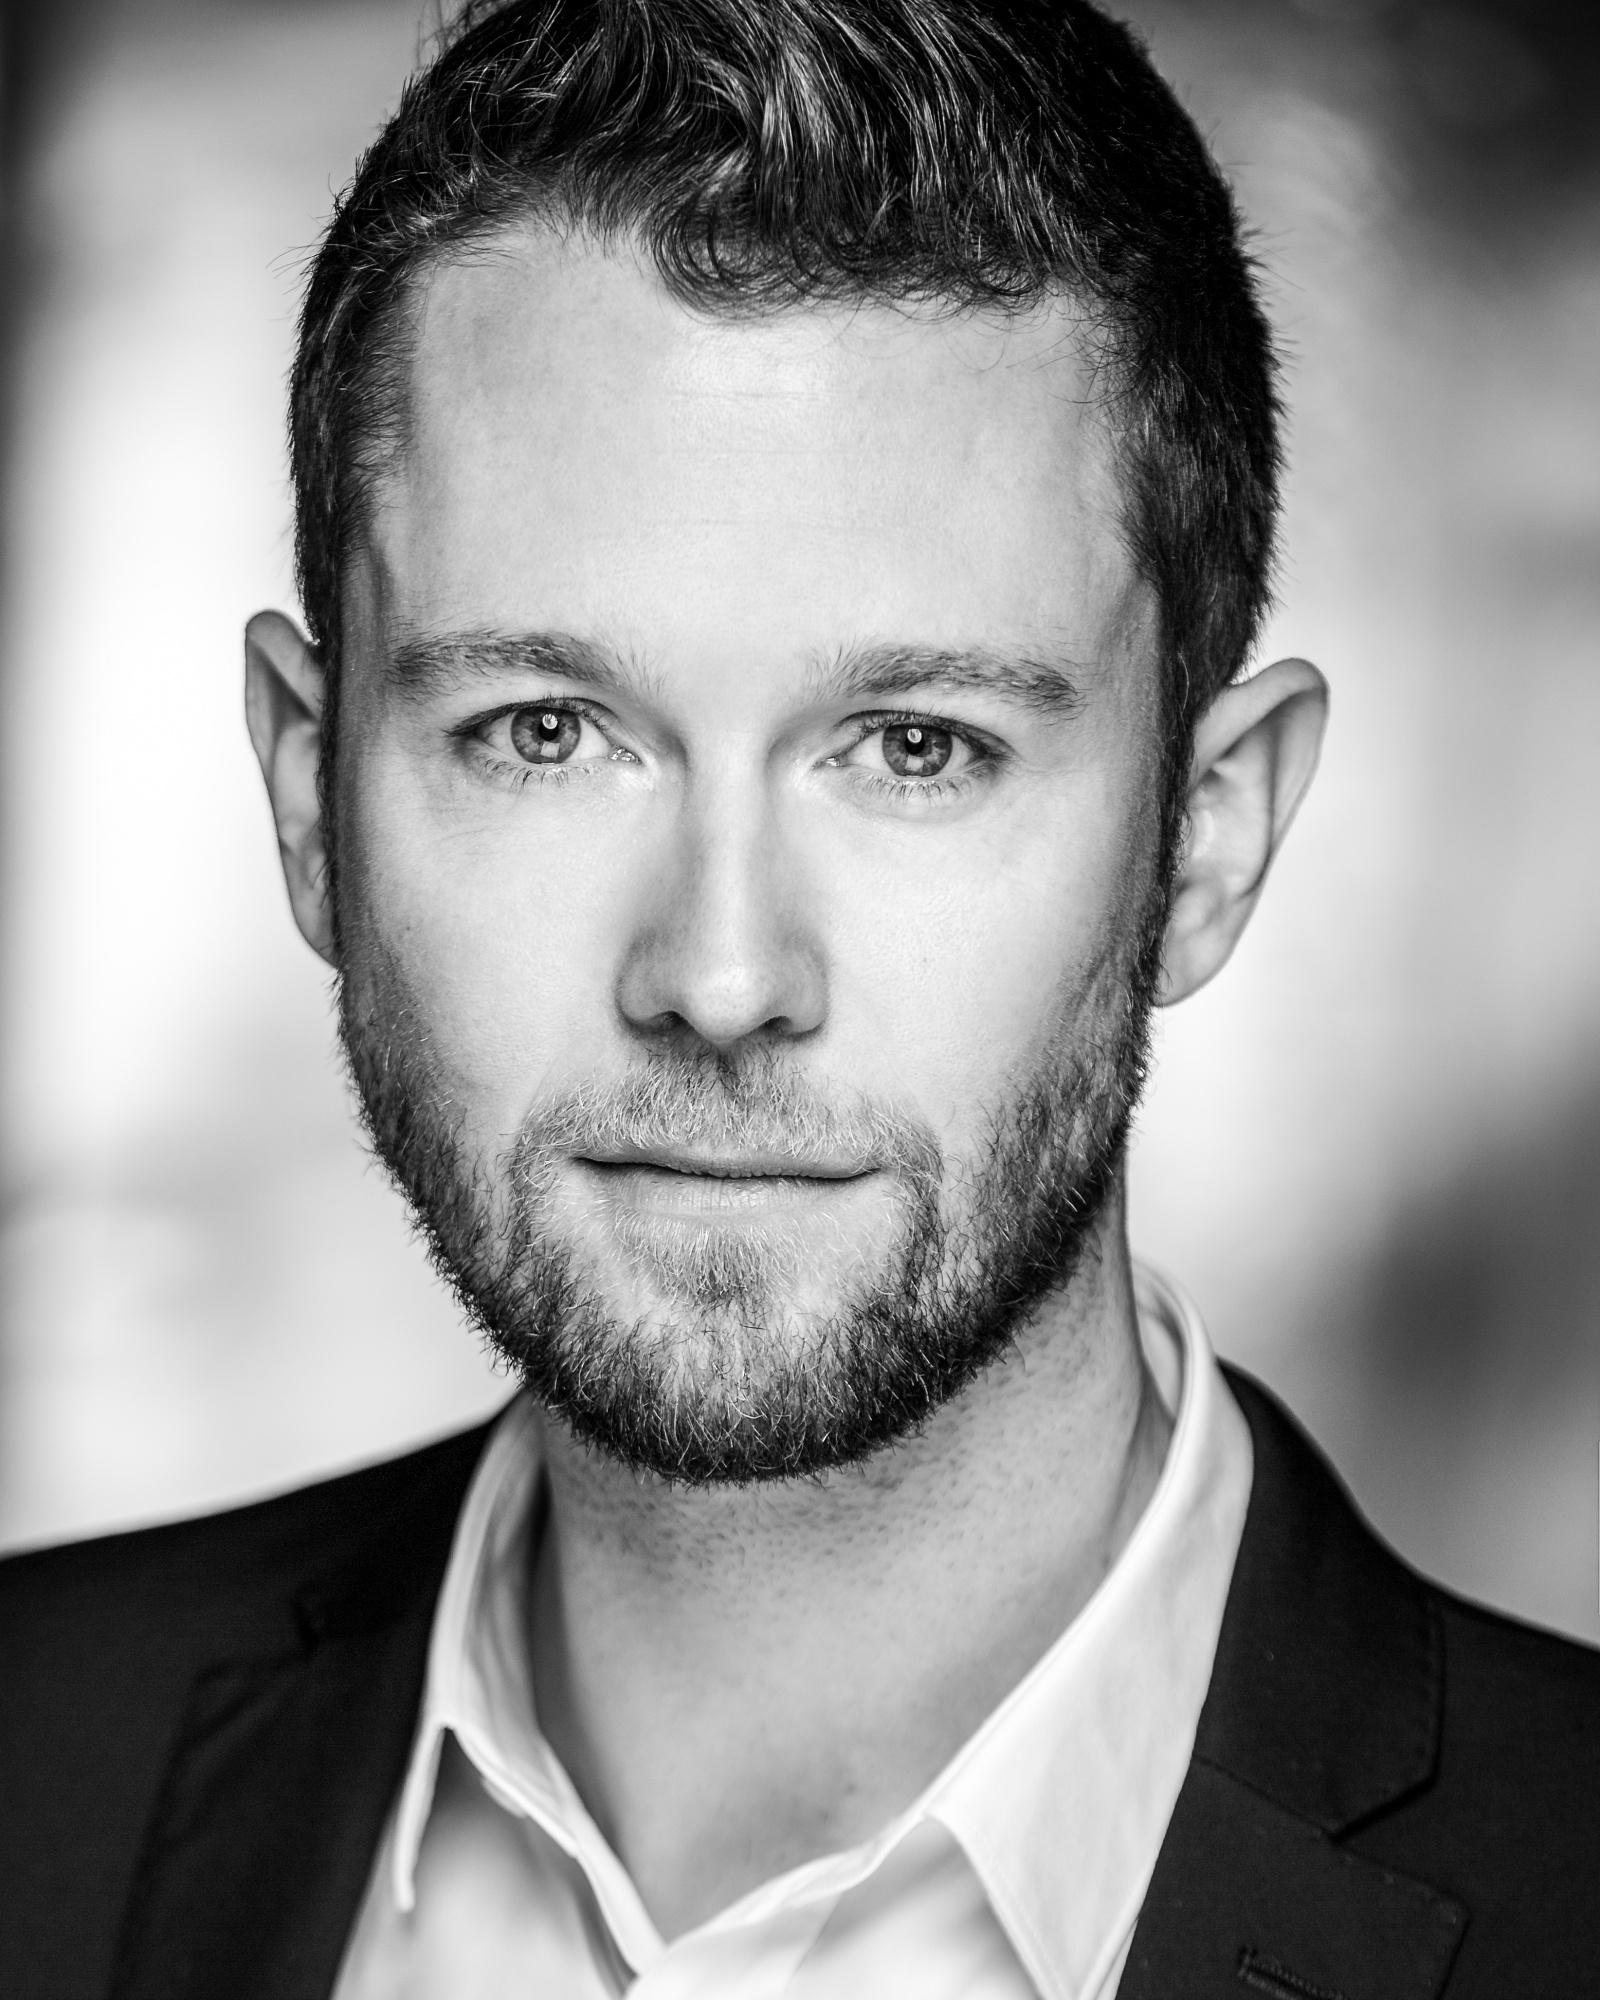 Charlie Frost's current headshot, taken in October 2014. www.charlie-frost.com